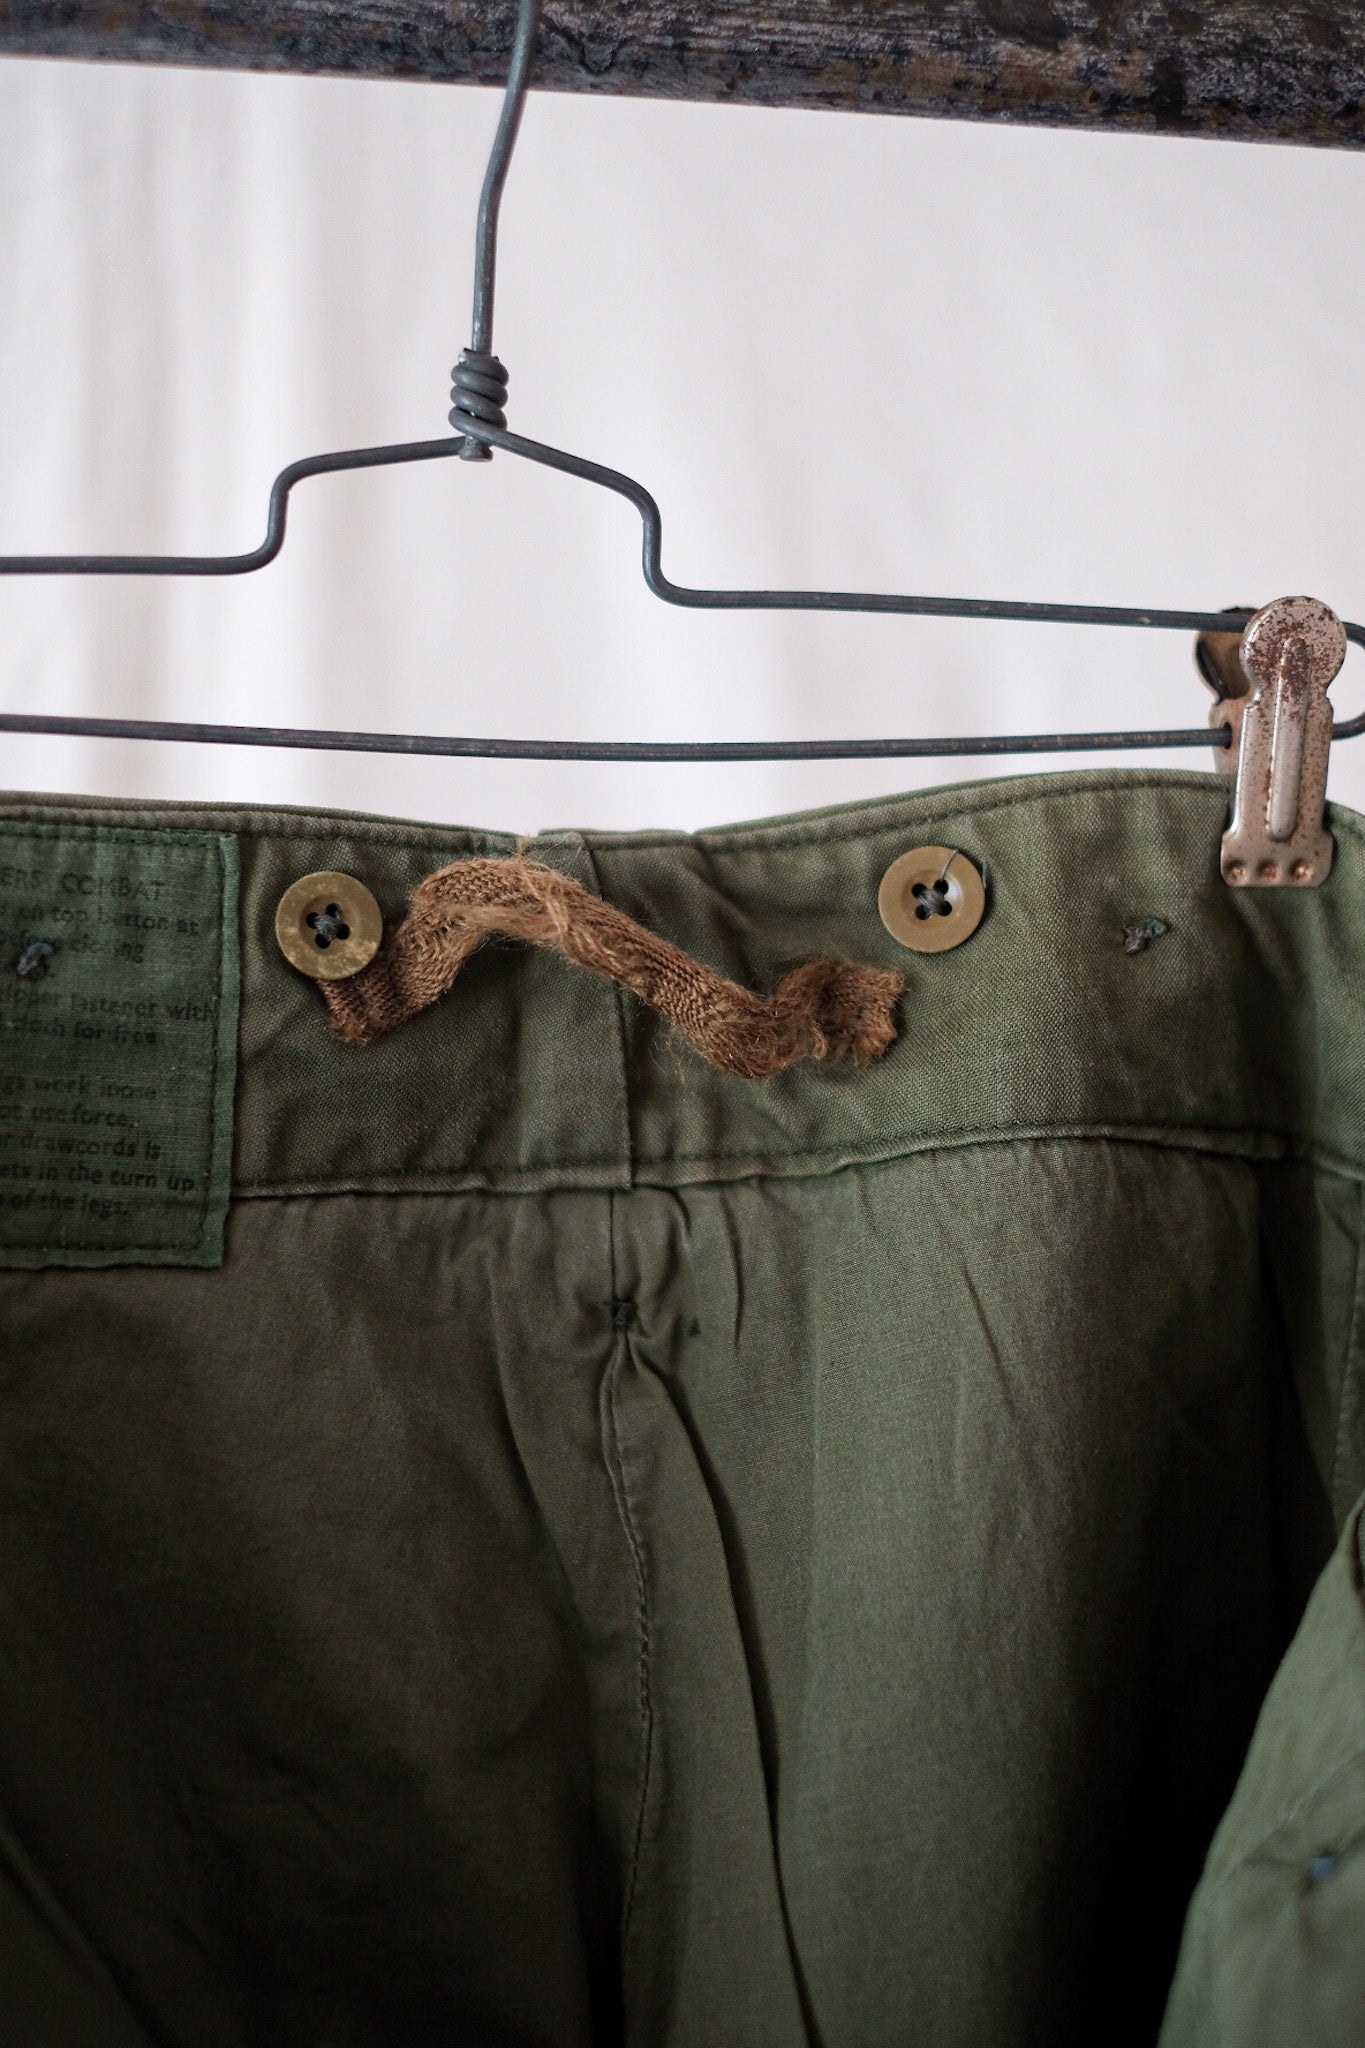 60's】British Army 1960 Pattern Combat Trousers